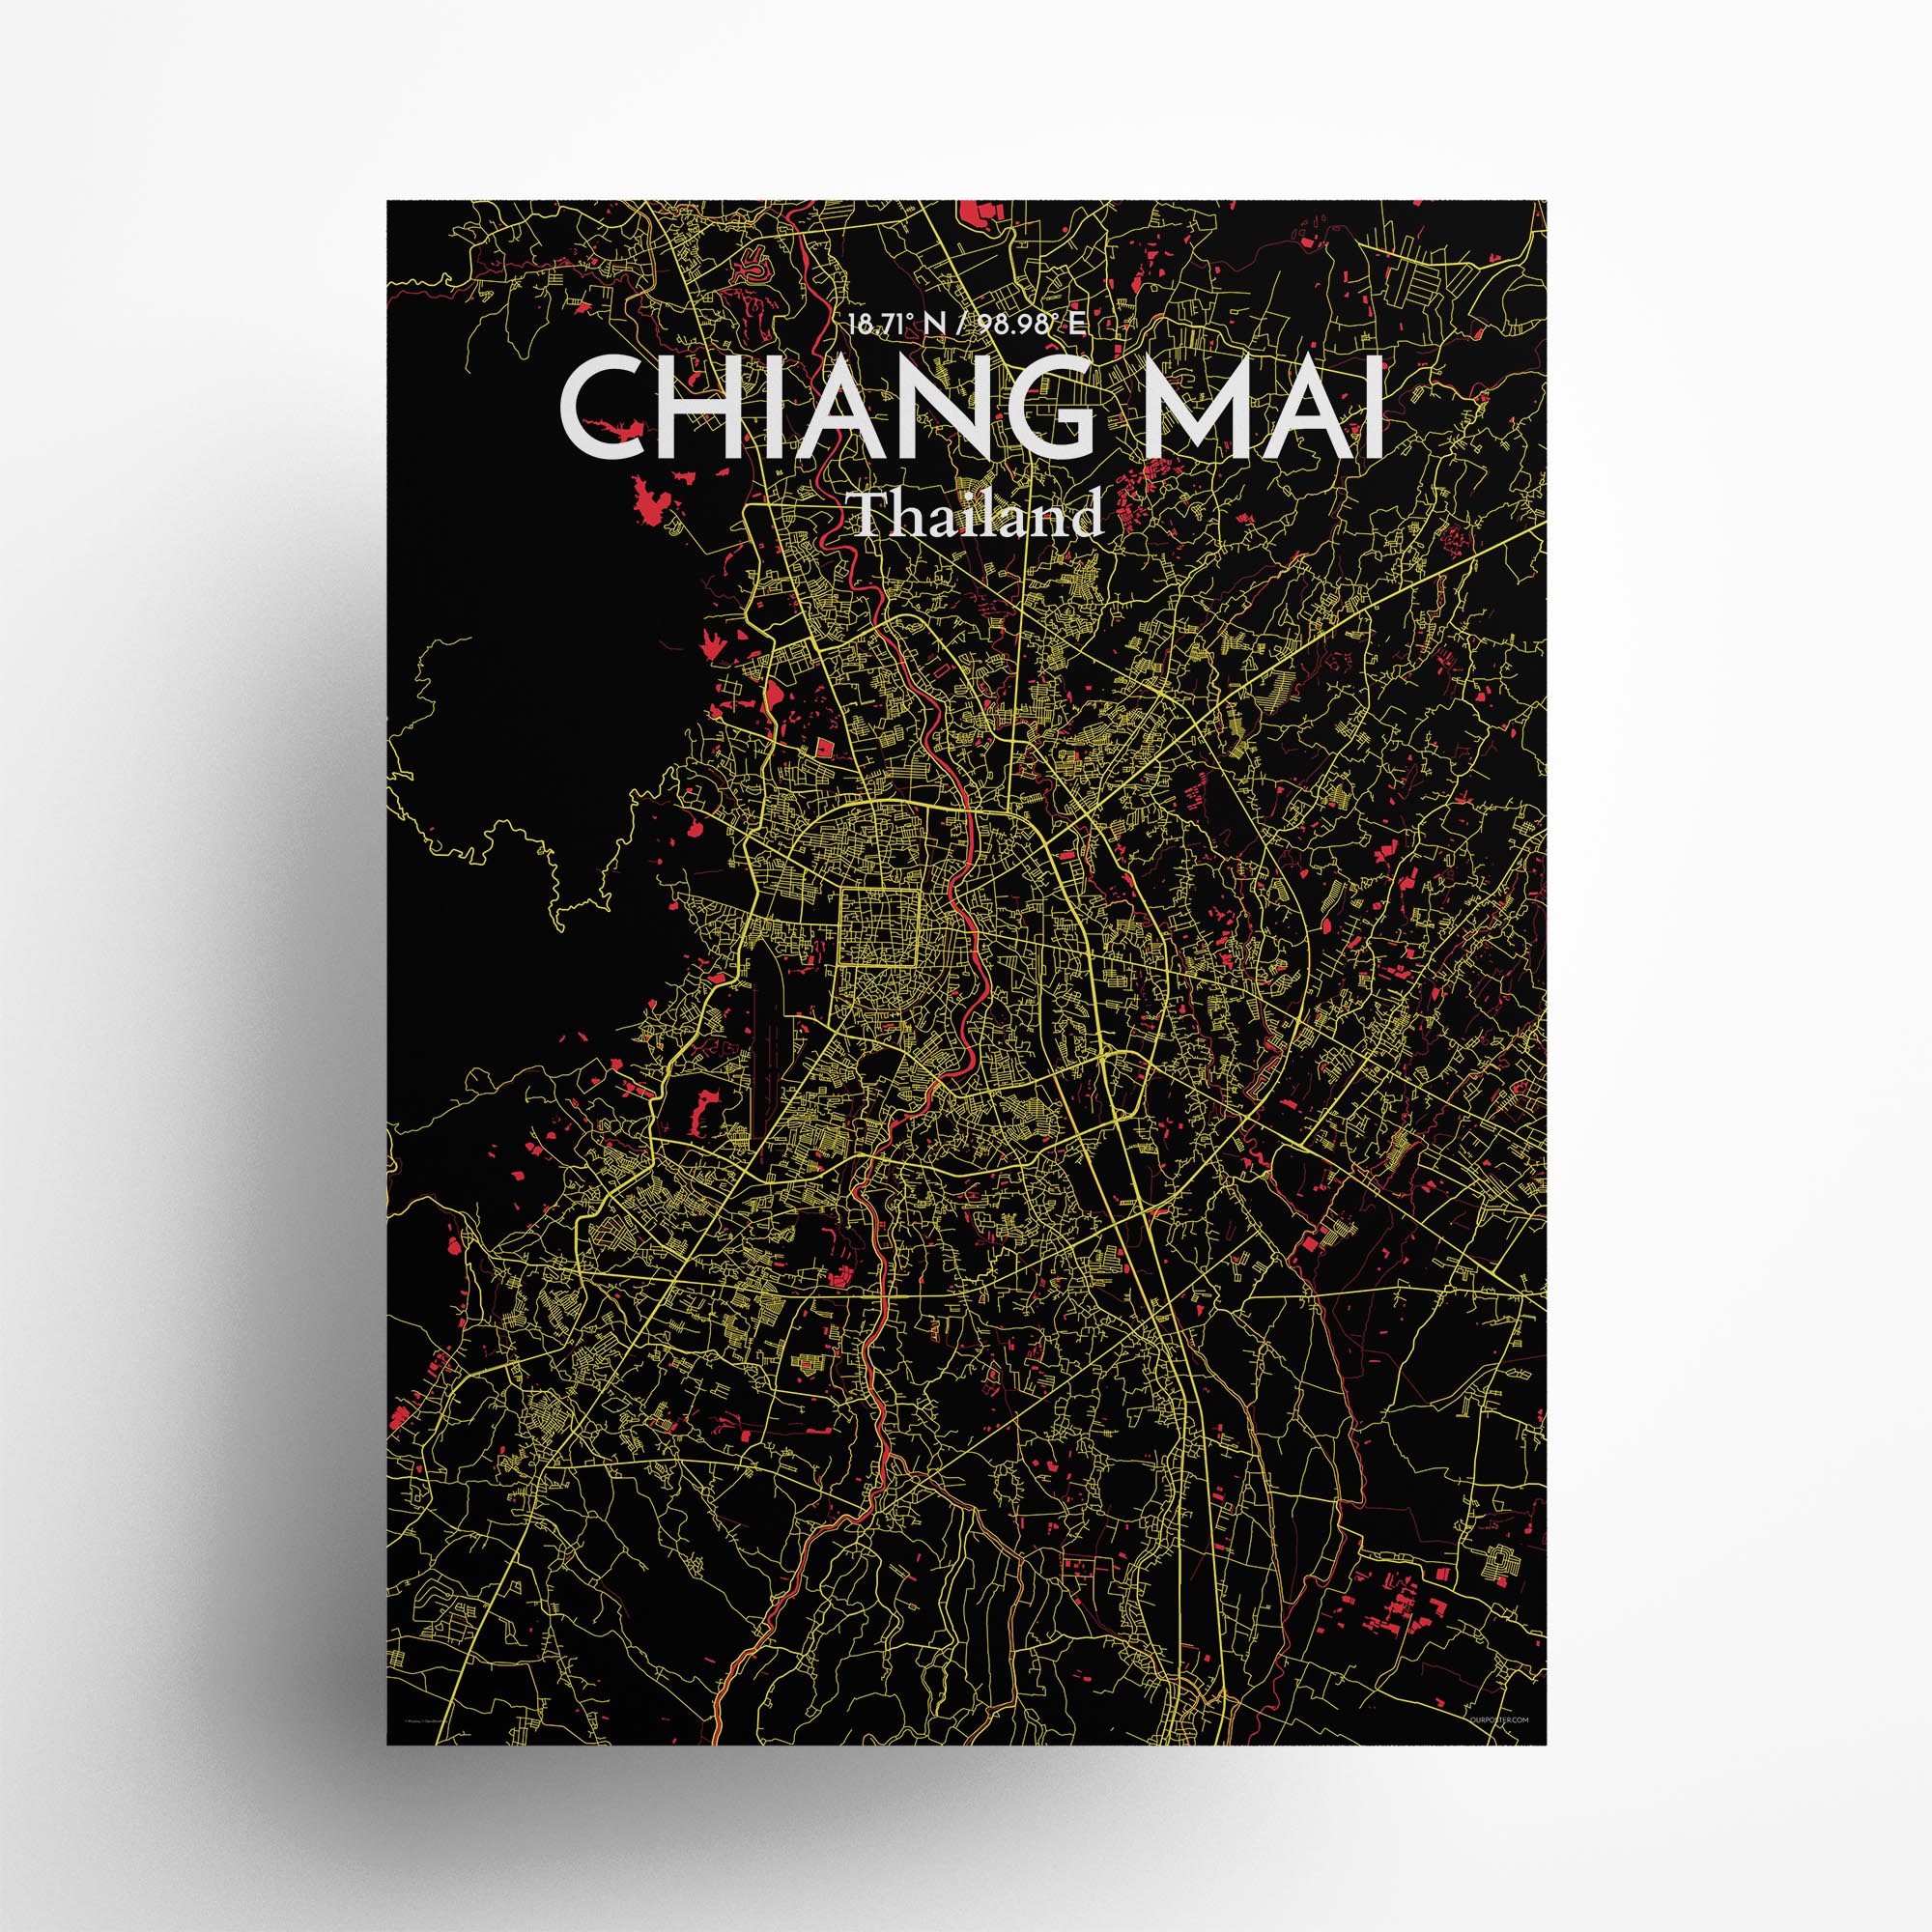 Chiang Mai city map poster in Contrast of size 18" x 24"